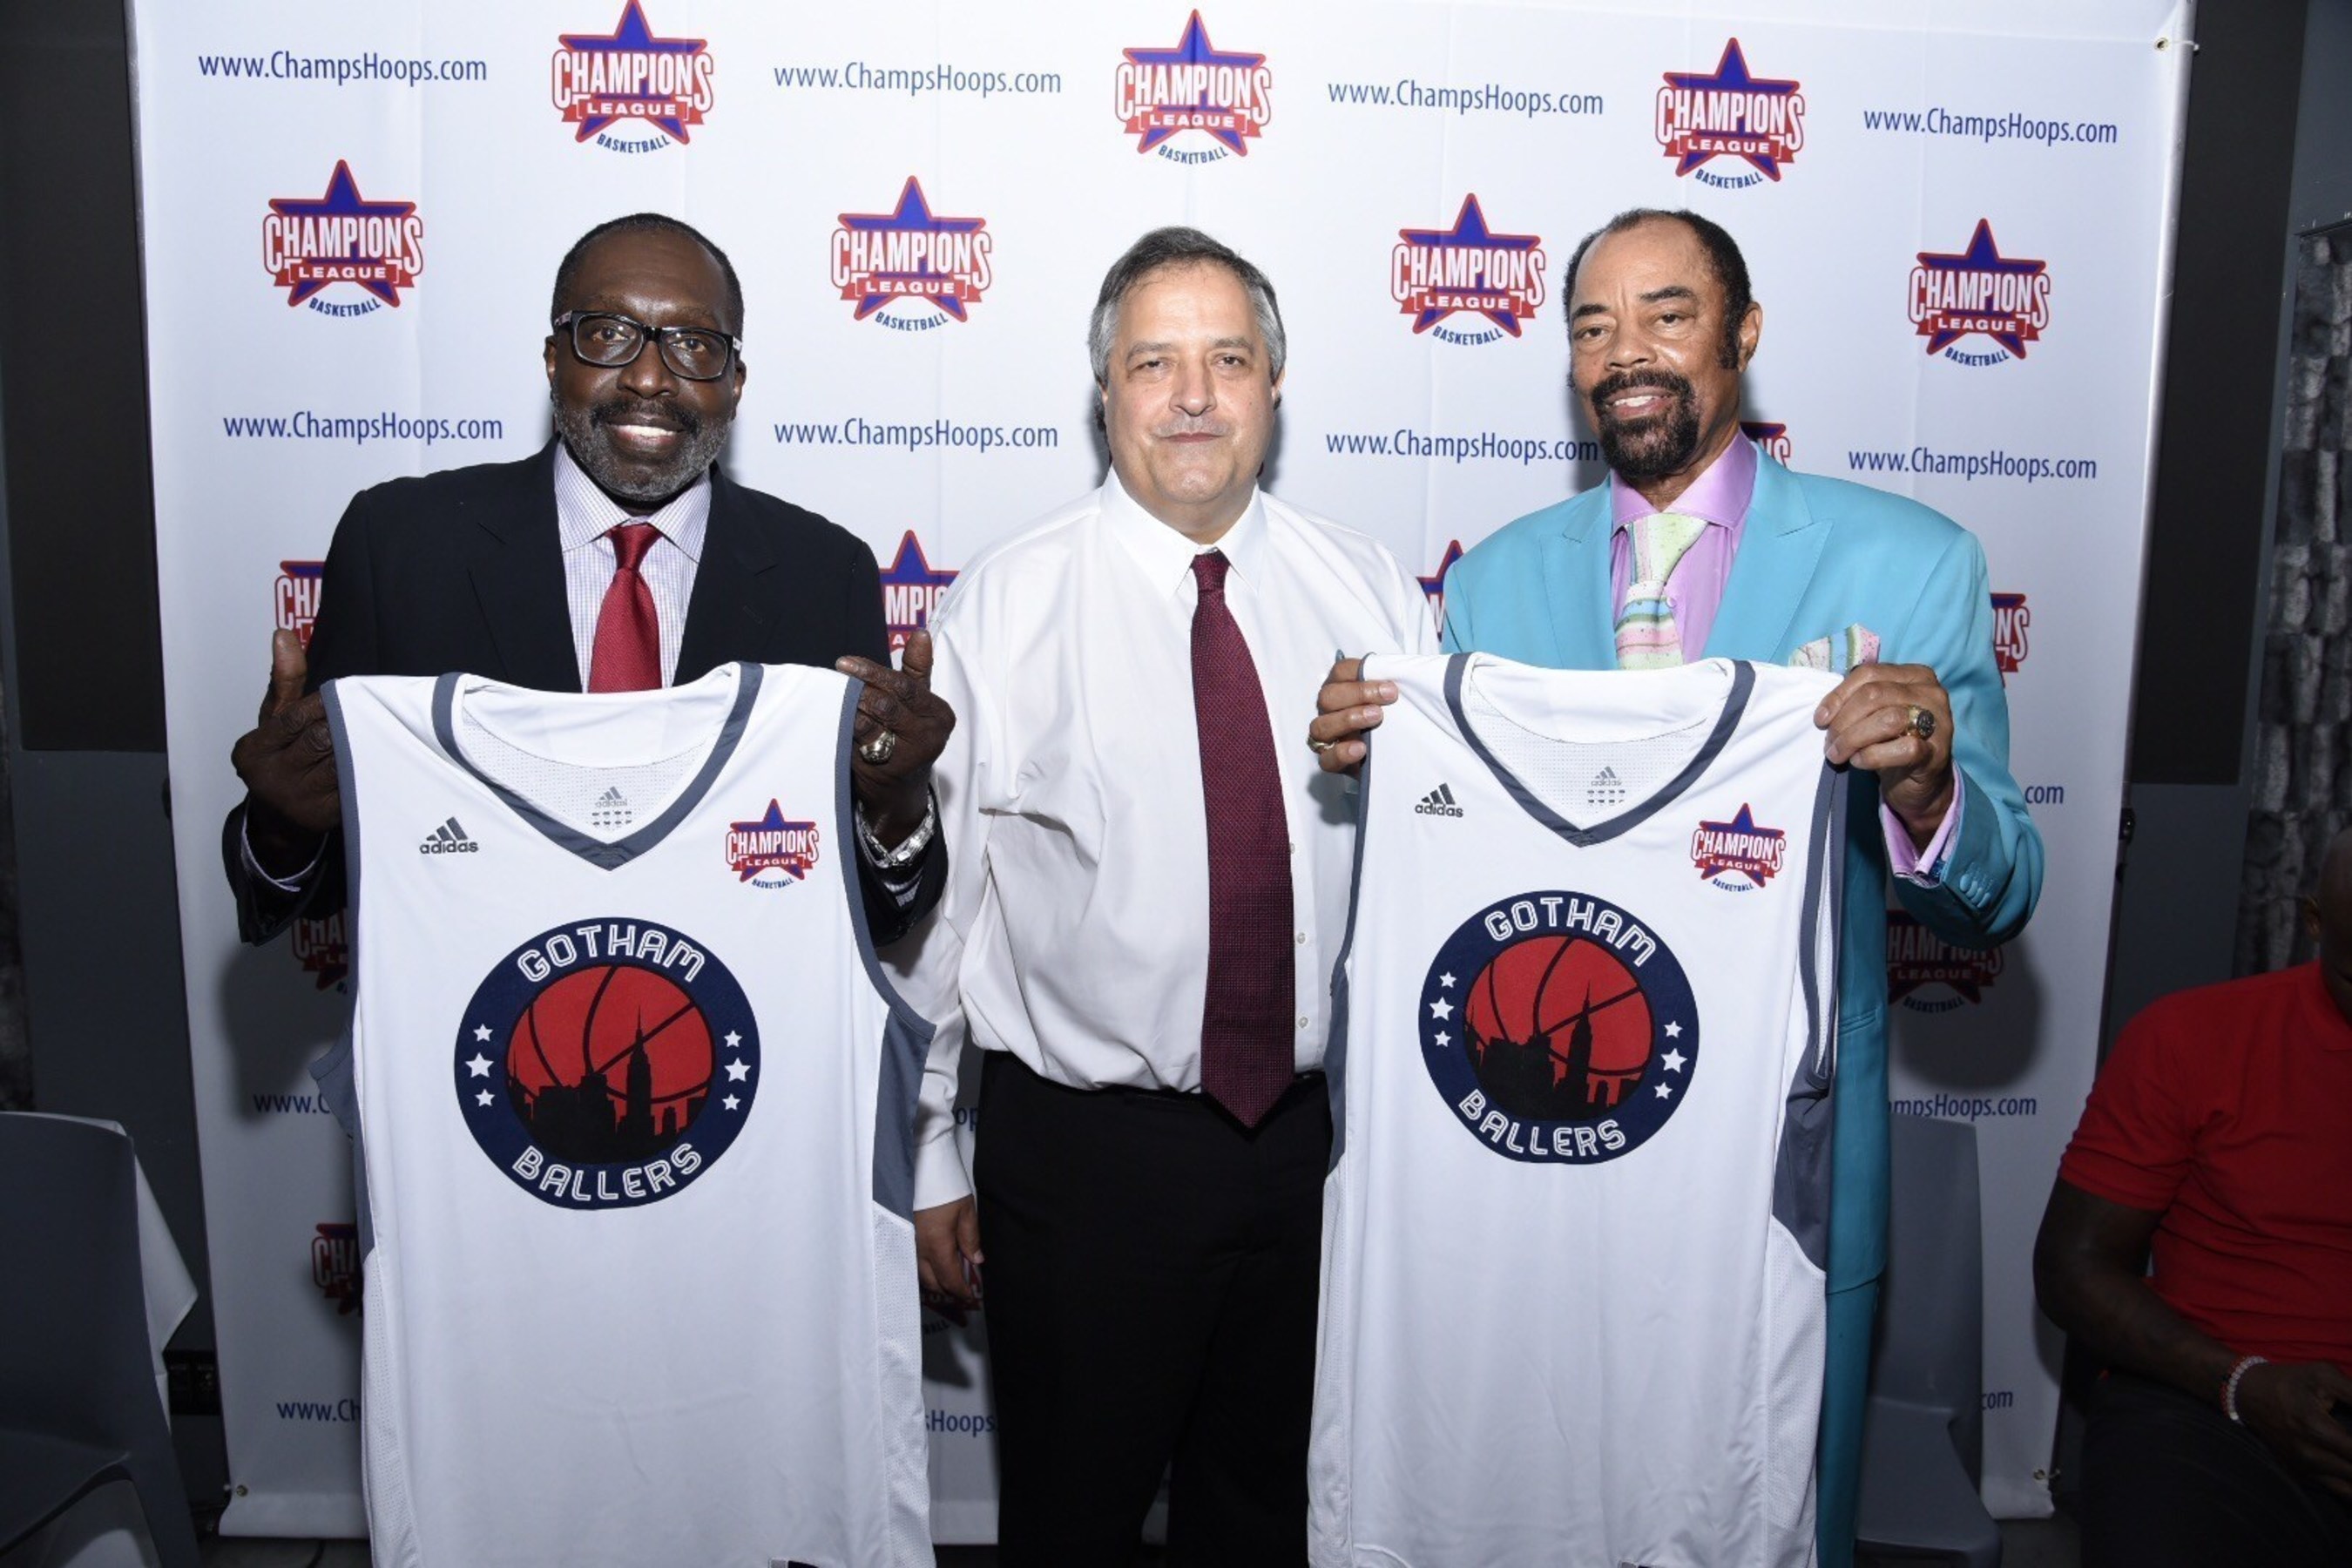 Earl Monroe (General Manager, Champions League Gotham Ballers), Carl George (Chairman & CEO, Champions League), Walt Frazier (President, Champions League Gotham Ballers)